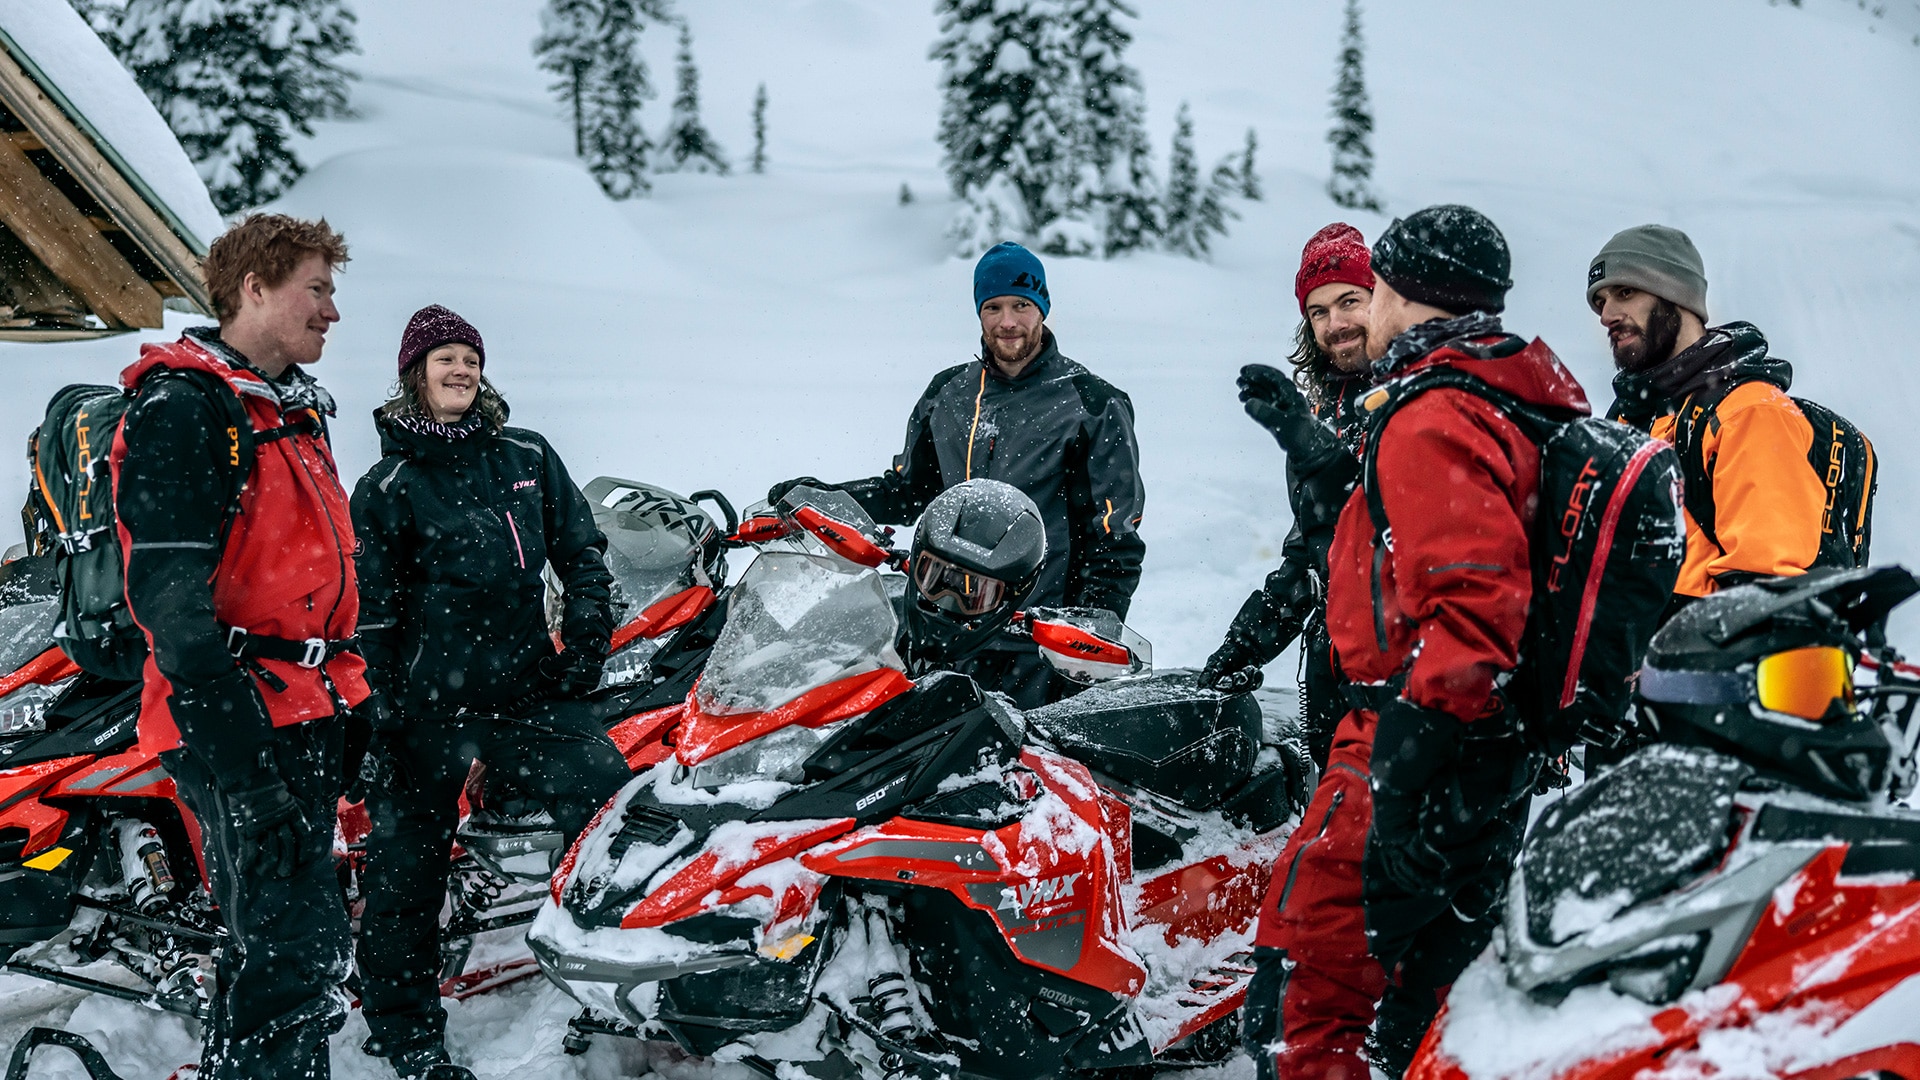 Group of riders catching up around their Lynx snowmobiles